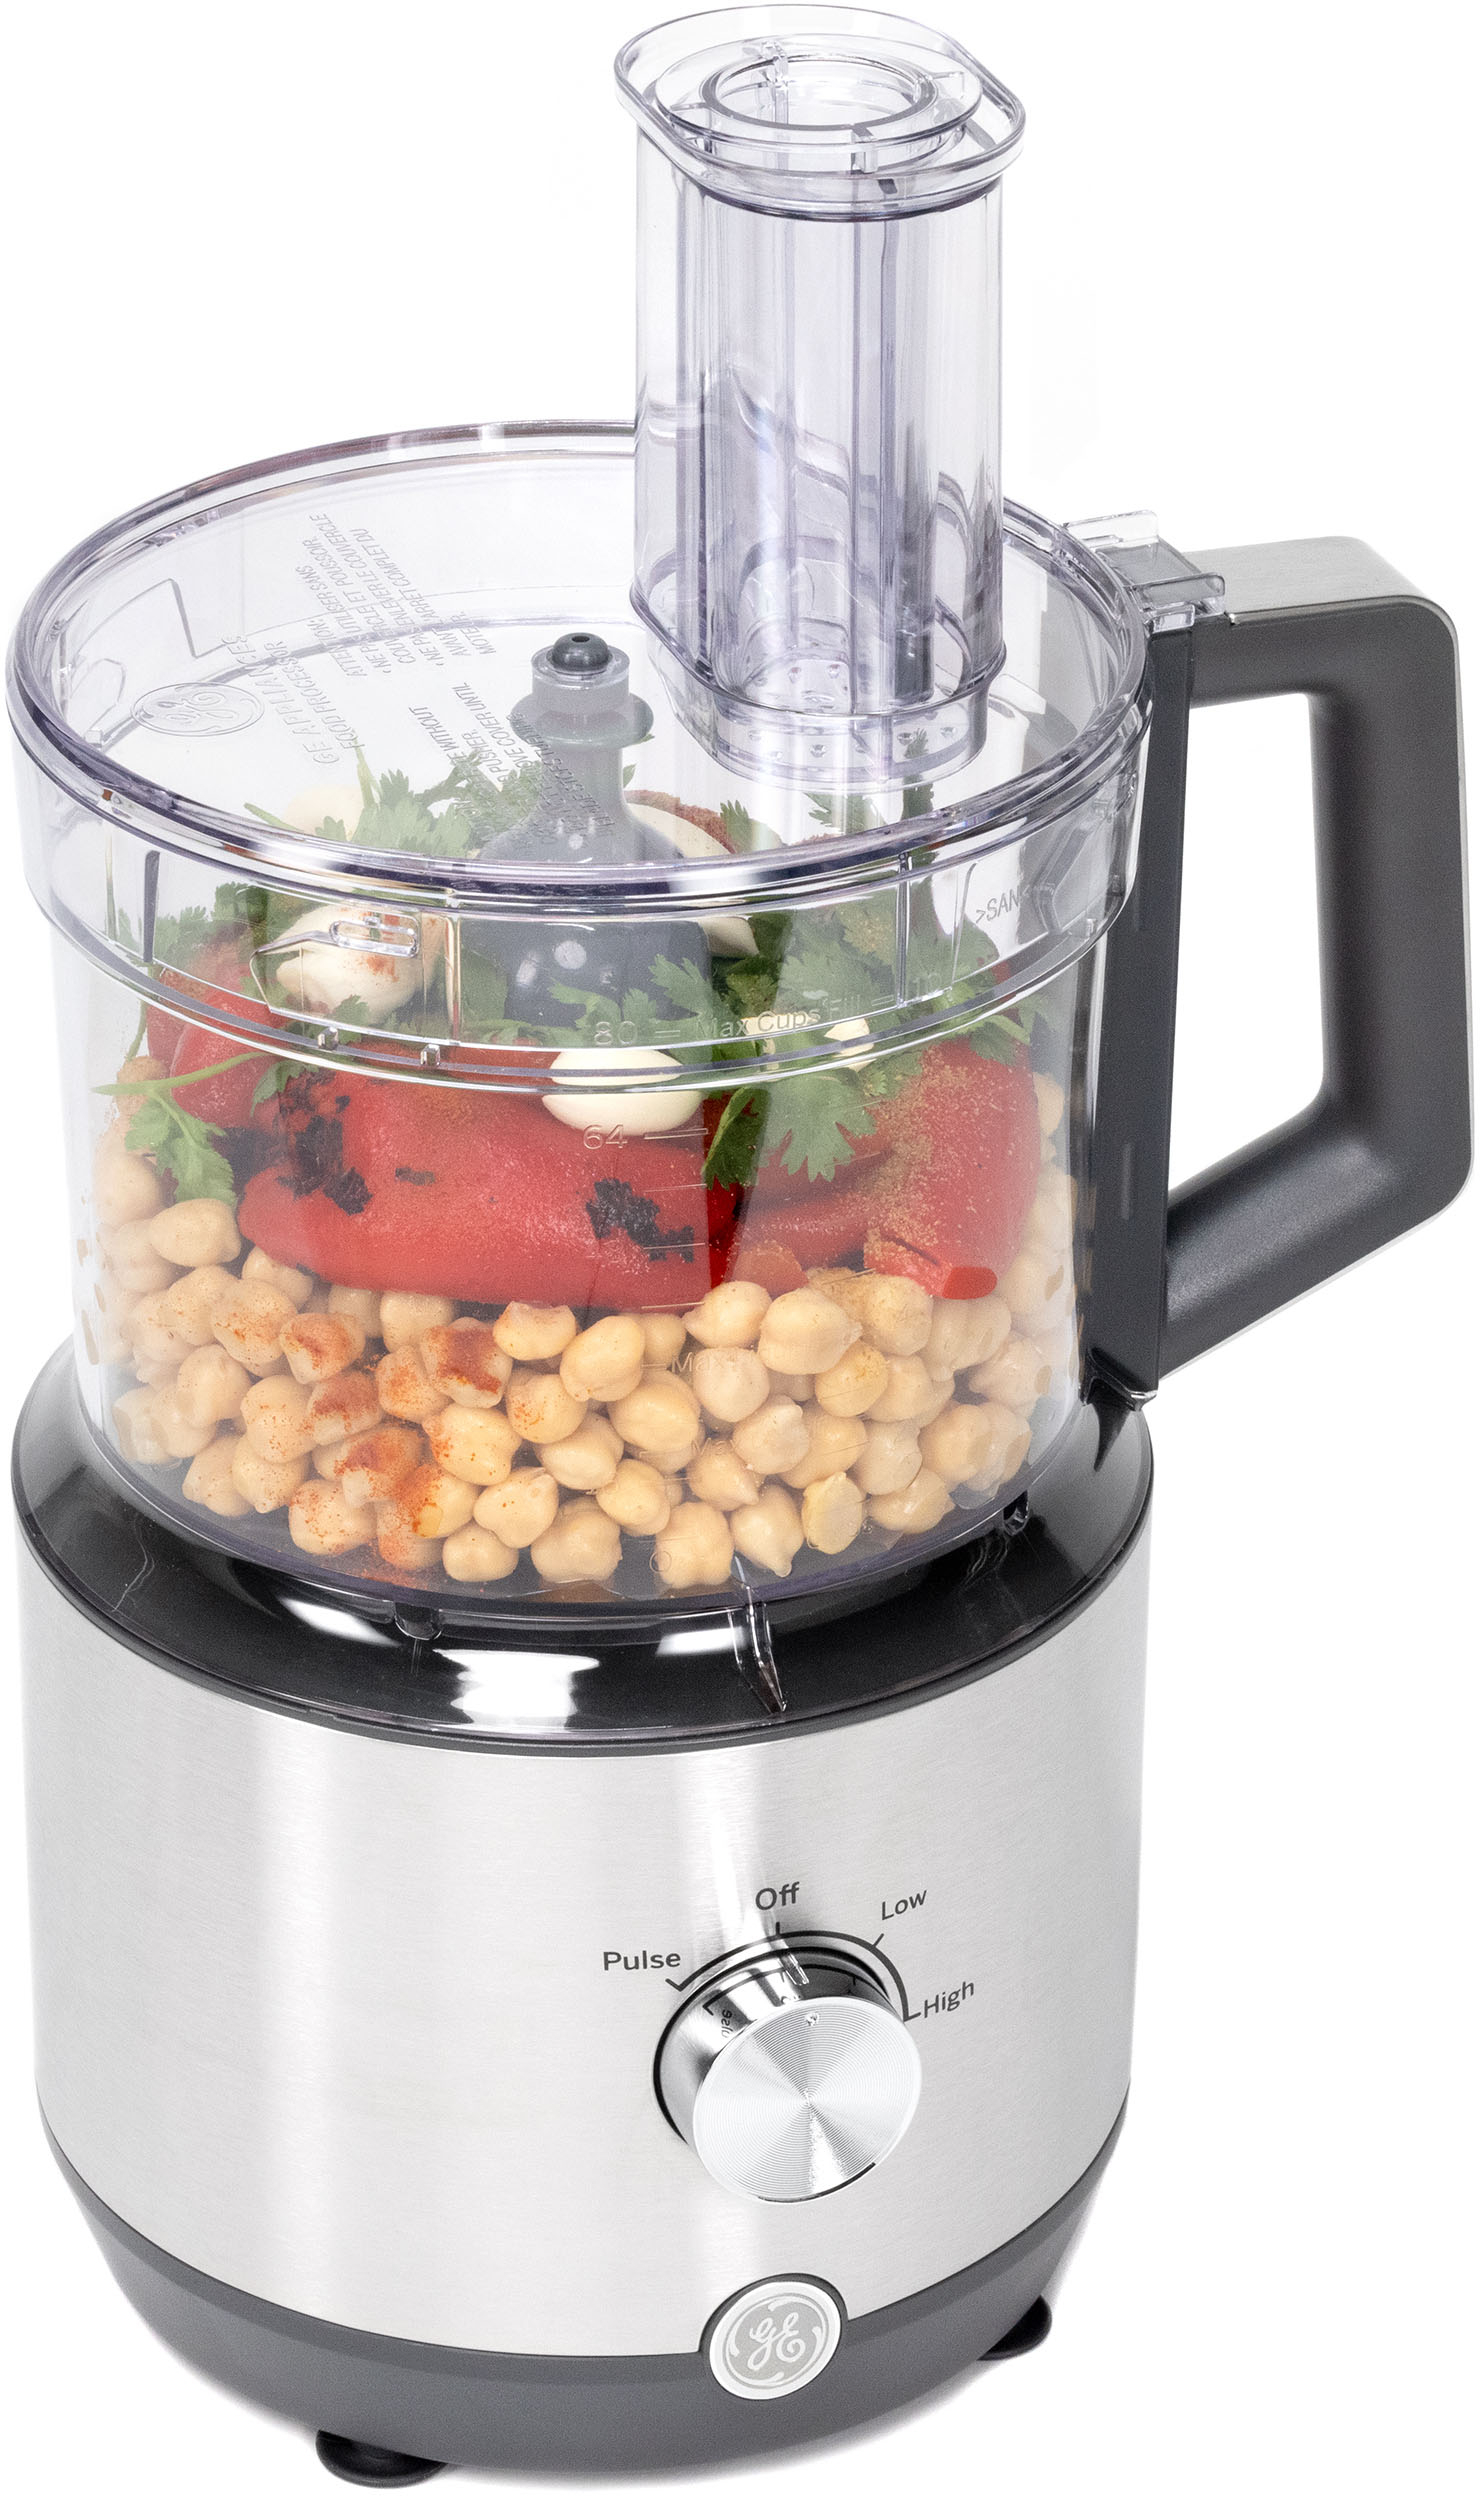 Mini Mixer Grinder: Whip up delicious dishes with compact Mixer Grinder -  The Economic Times